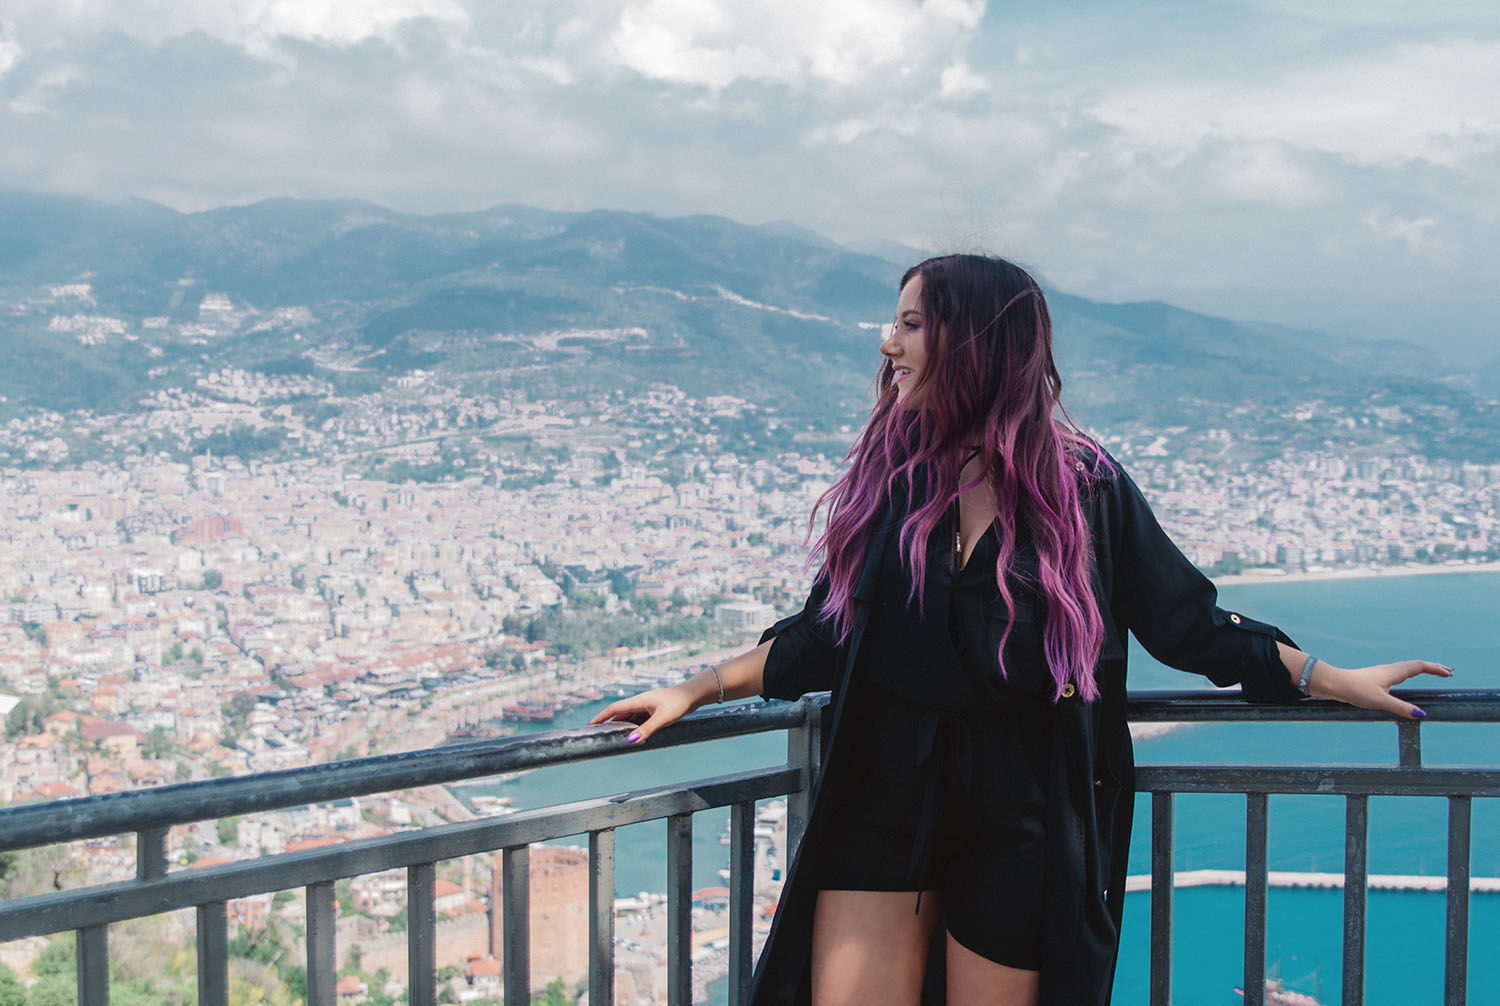 Purple balayage & #Colorfulhair with L'Oreal Professionnel